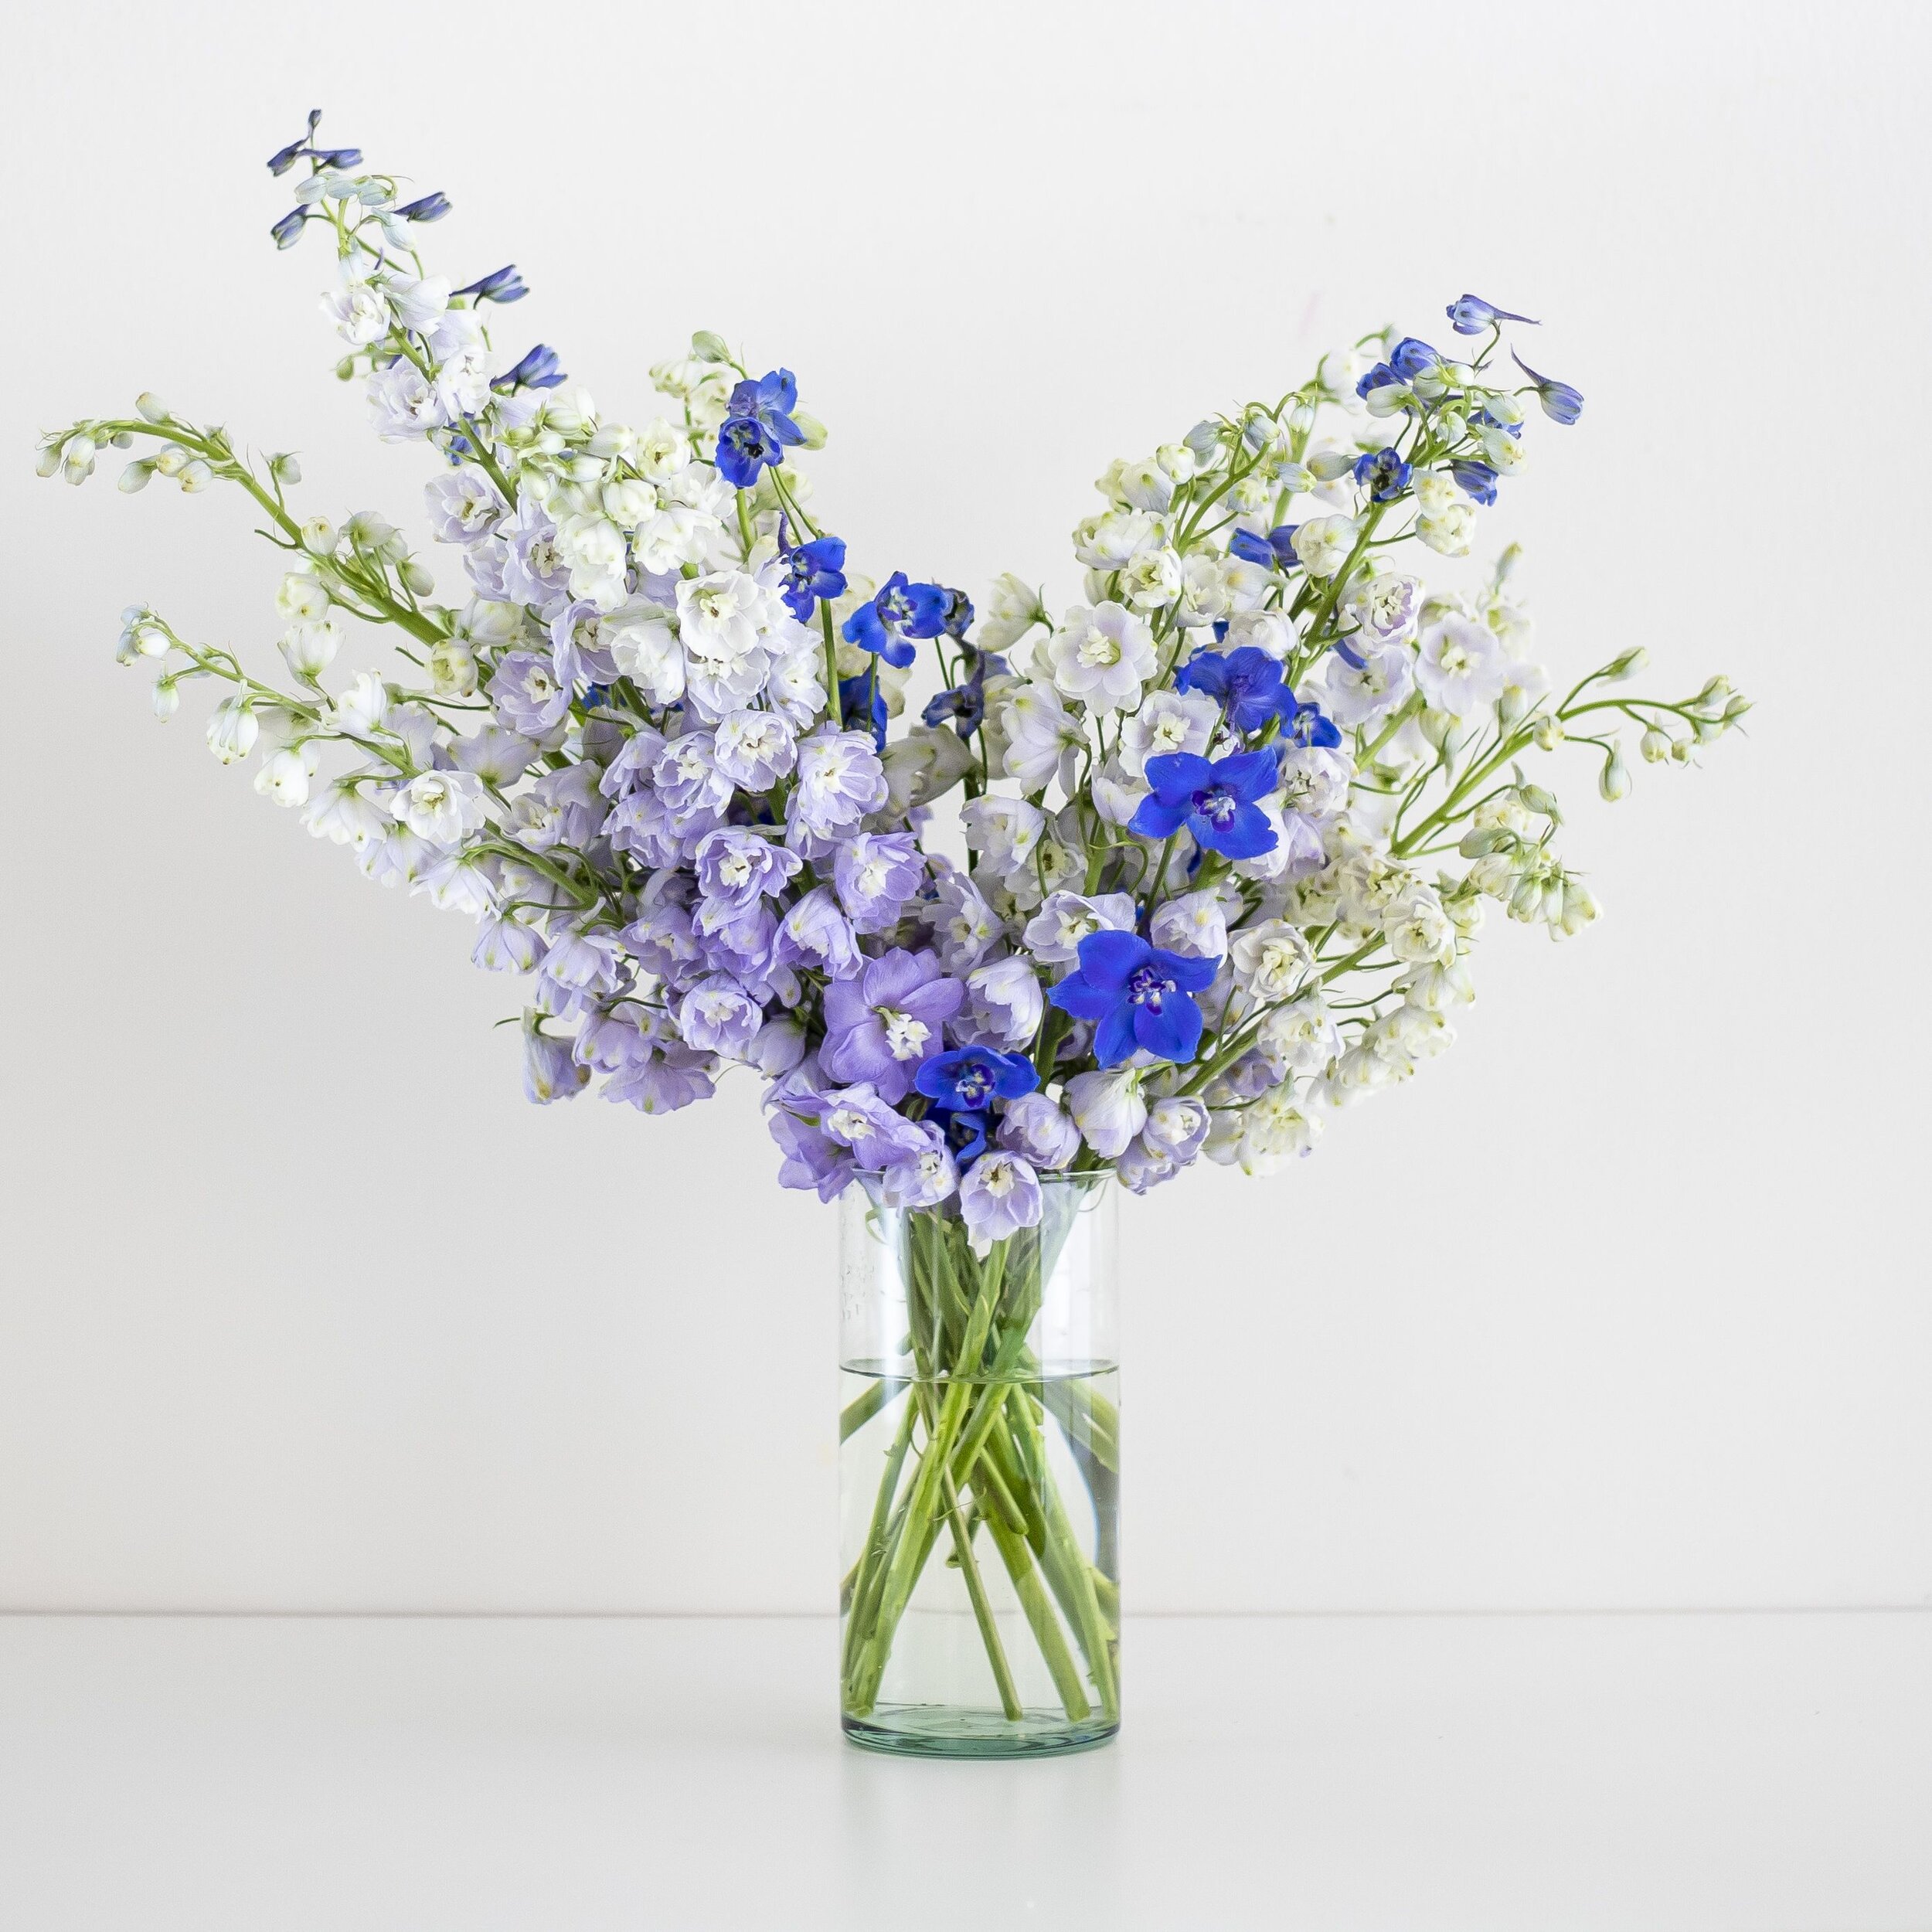 Light purple, purple, and bold blue stems of delphinium in a glass vase with water placed in front of a white background